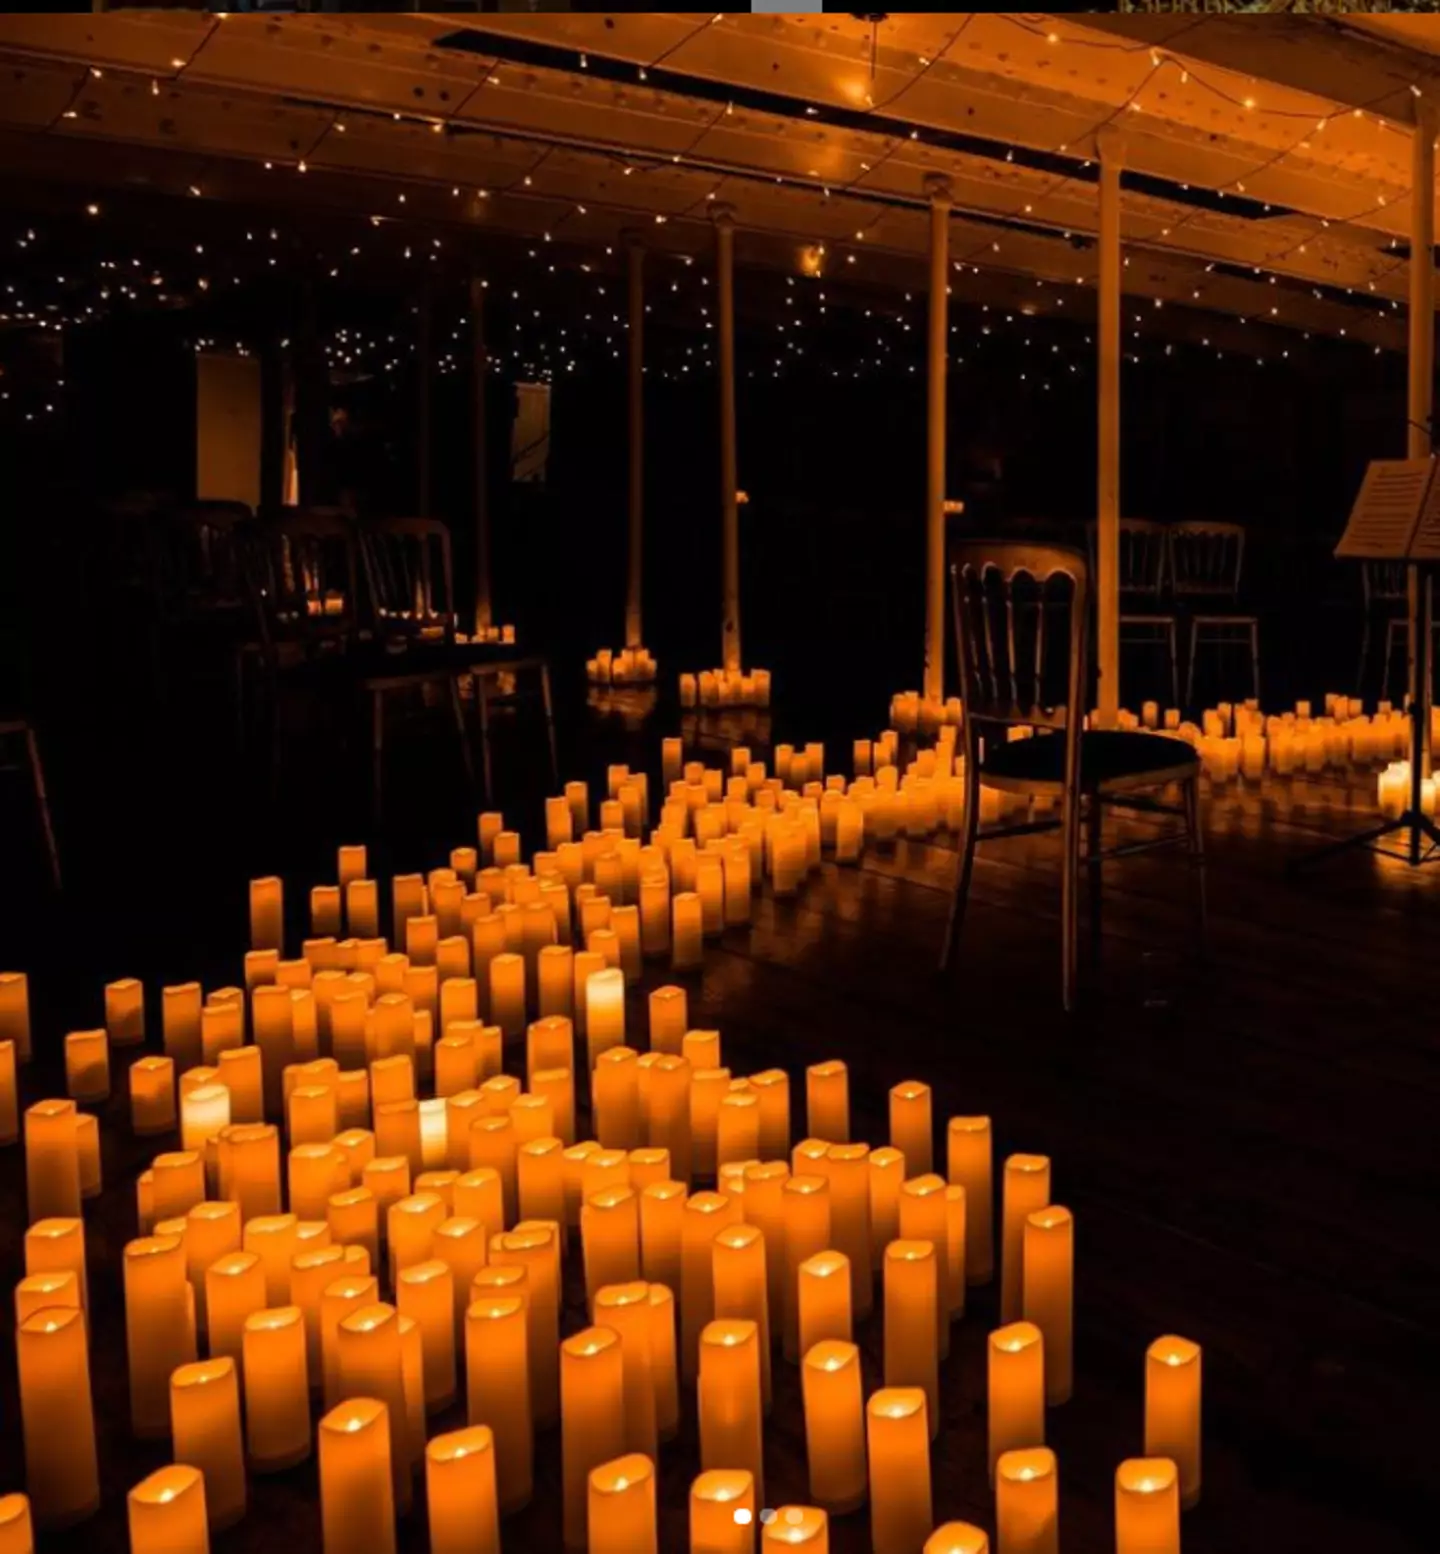 These candle light concerts are known to be beautiful (